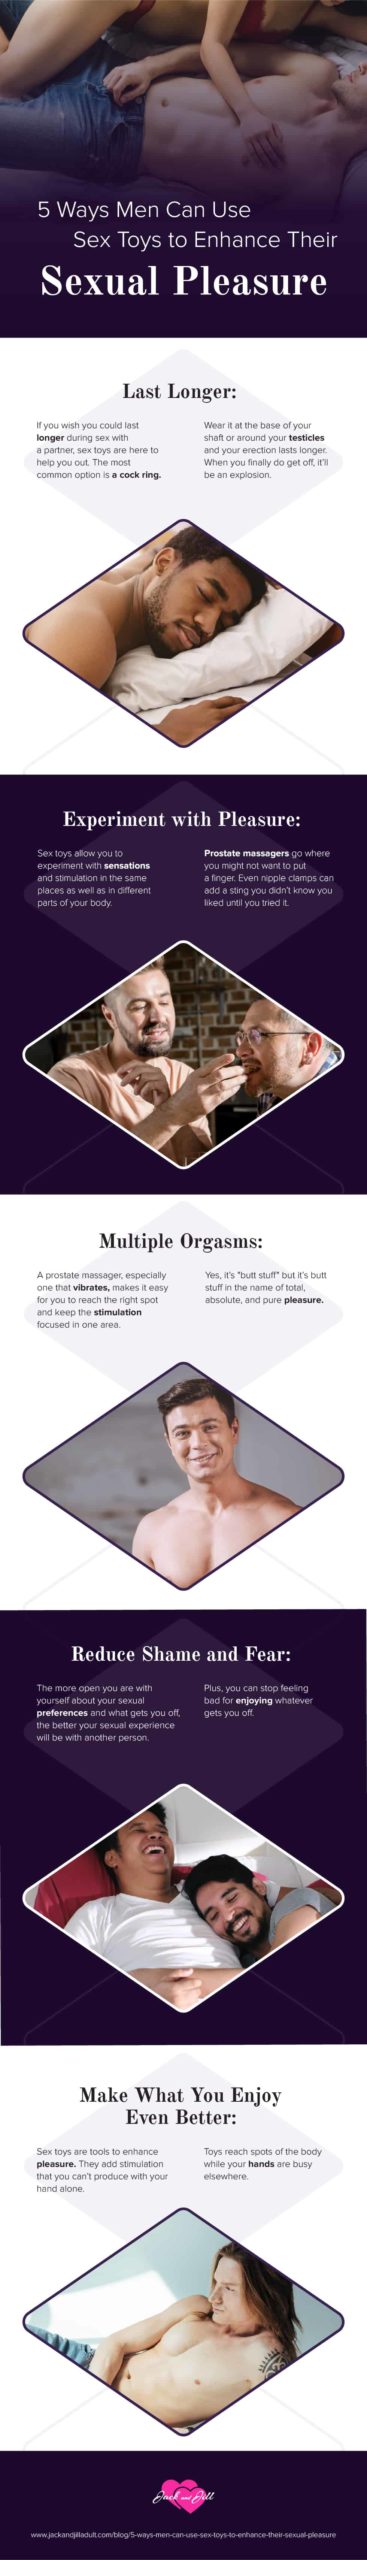 Infographic for 5 Ways Men Can Use Sex Toys to Enhance Their Sexual Pleasure